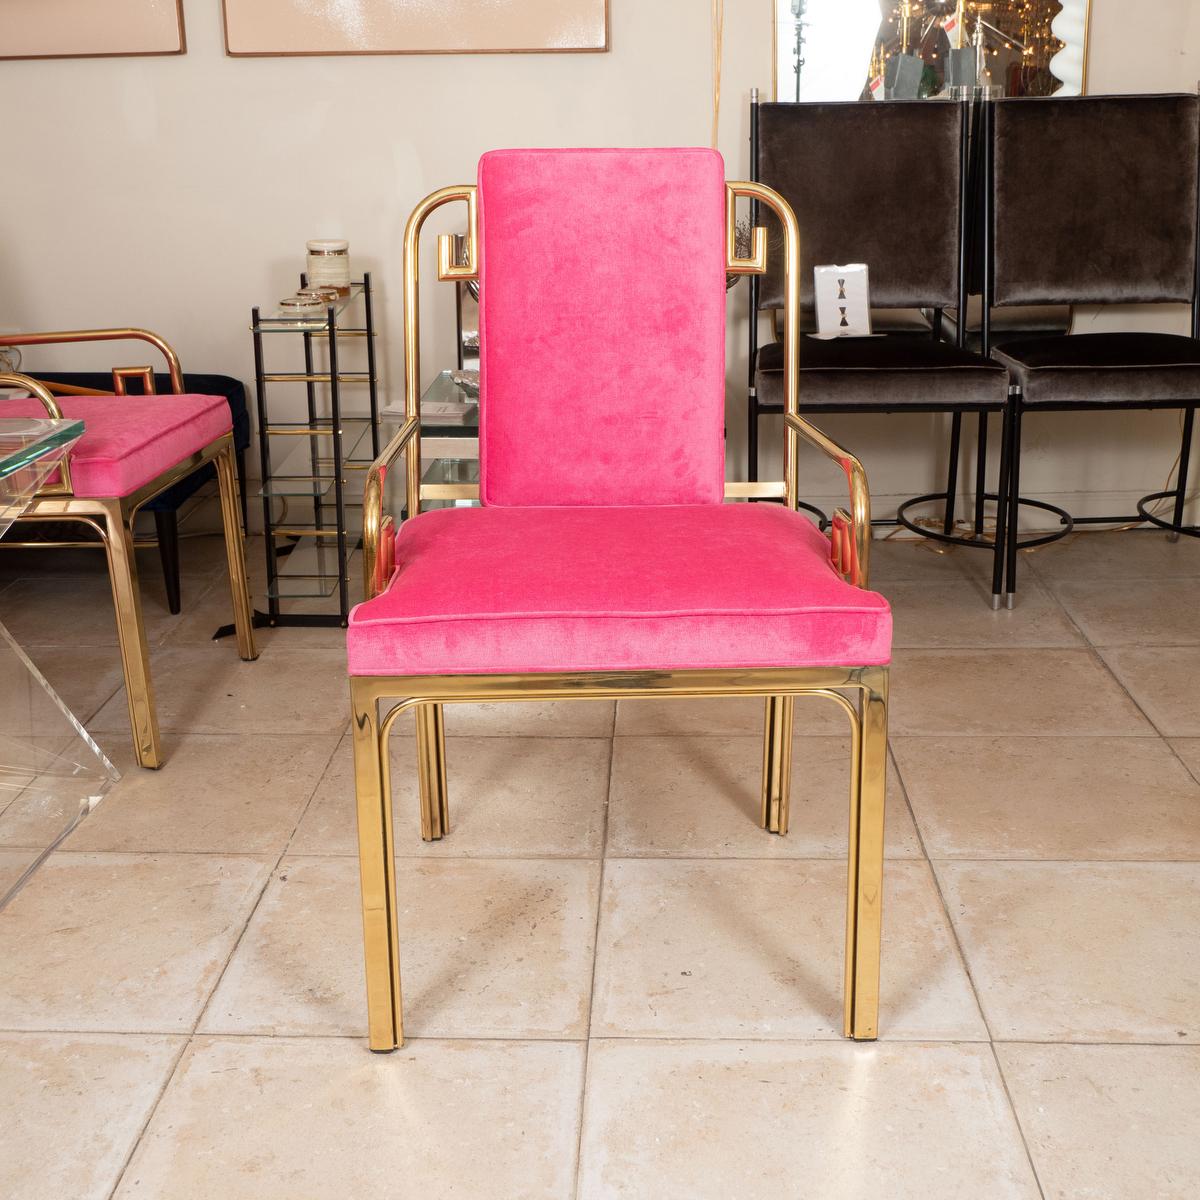 Brass campaign style chair with upholstered seat and back. 